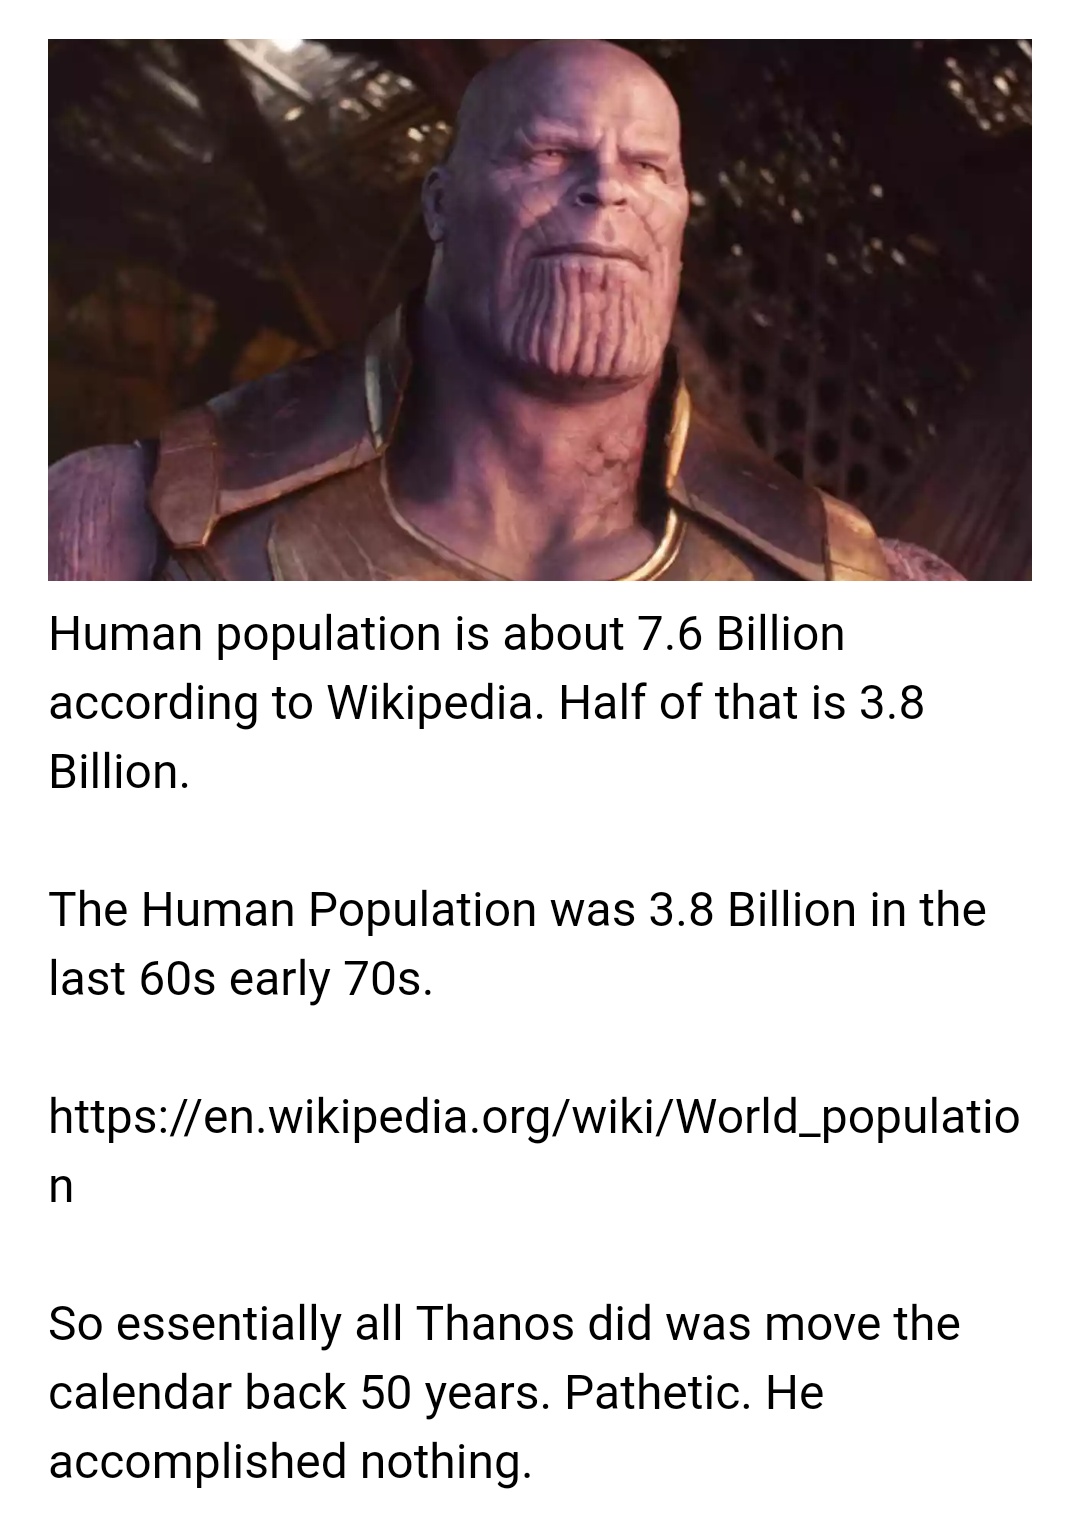 Breakdown by numbers of how Thanos barely put the population back any more than 50 years